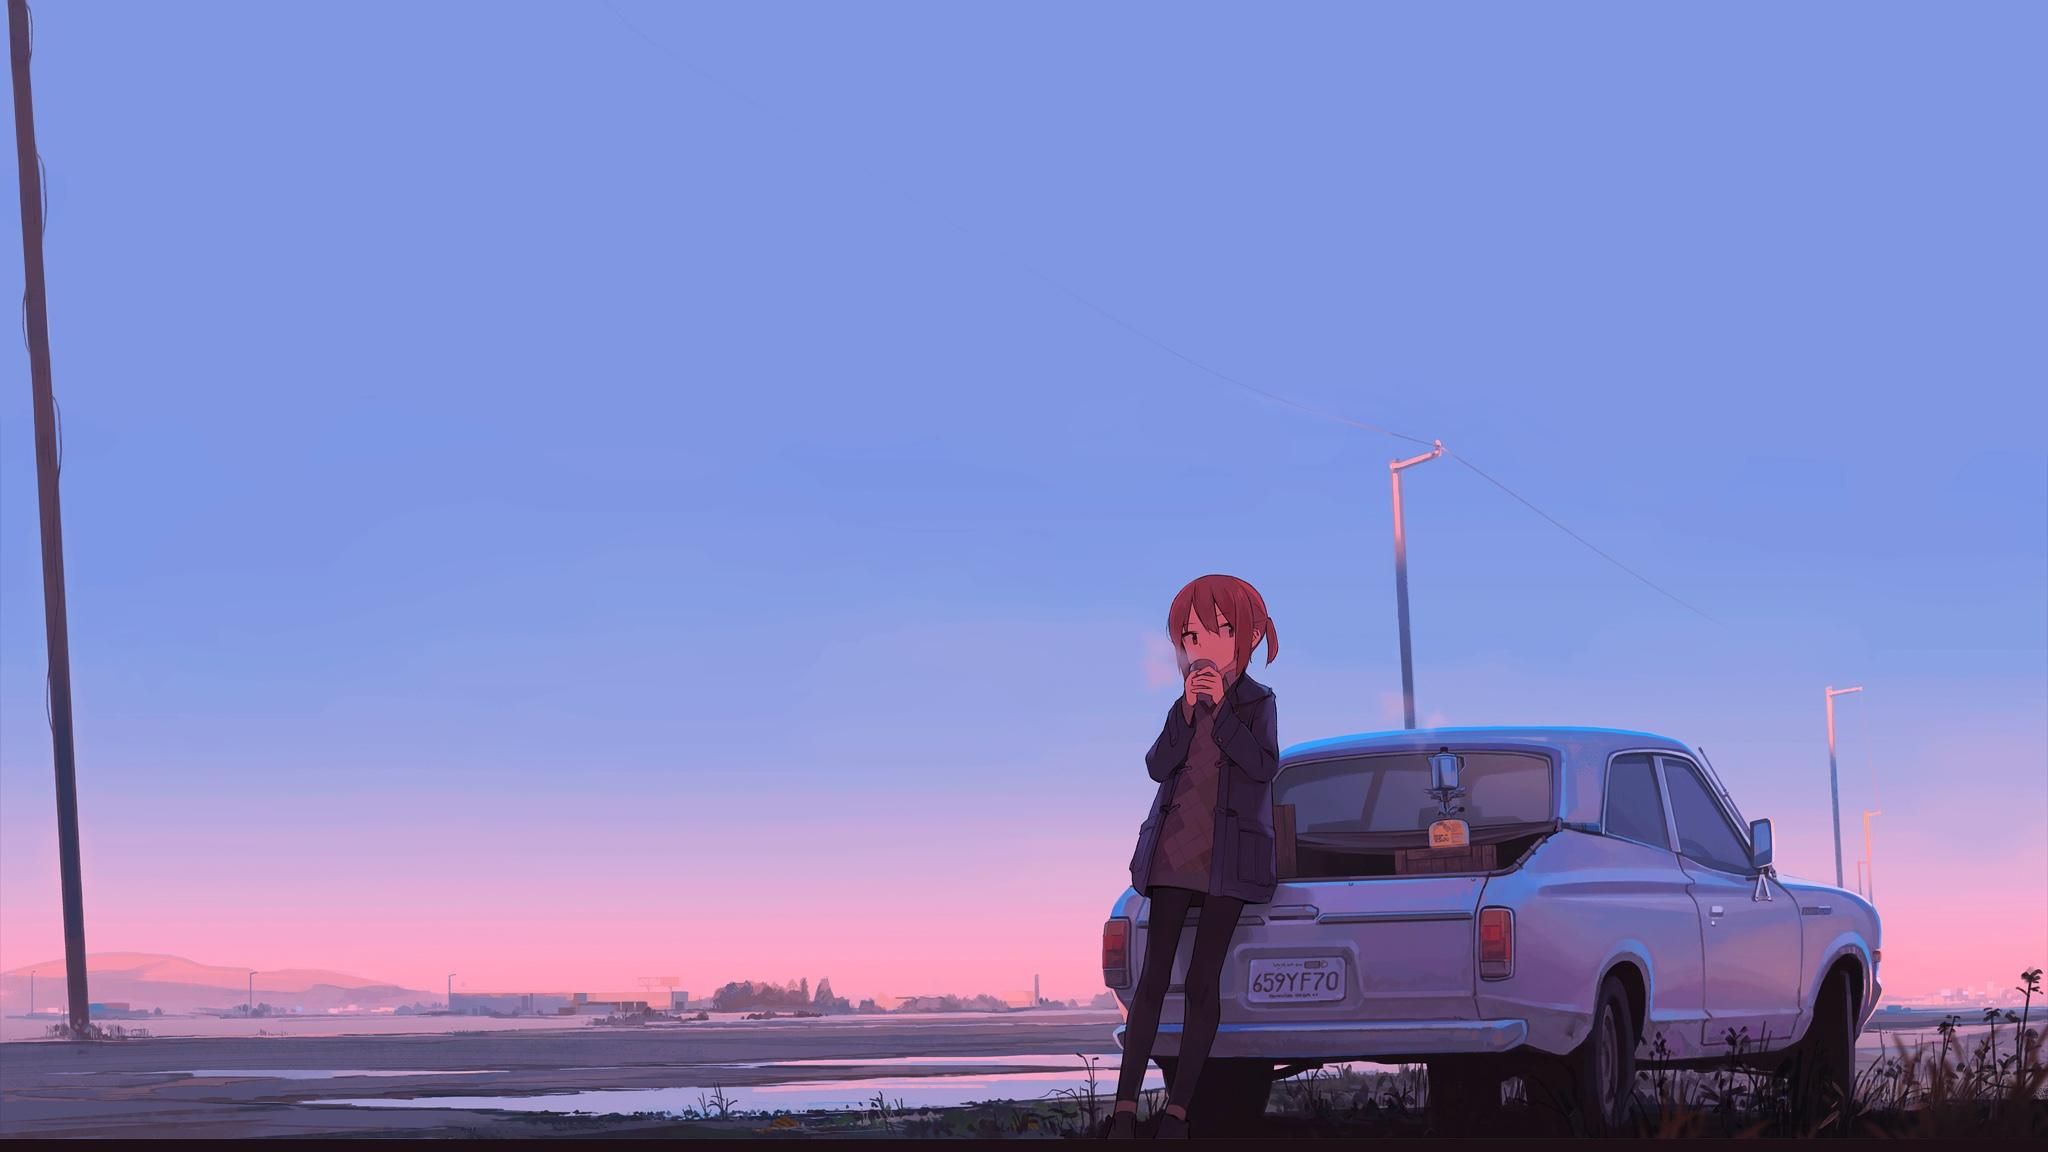 A girl leaning on a car looking at the sunset - 2048x1152